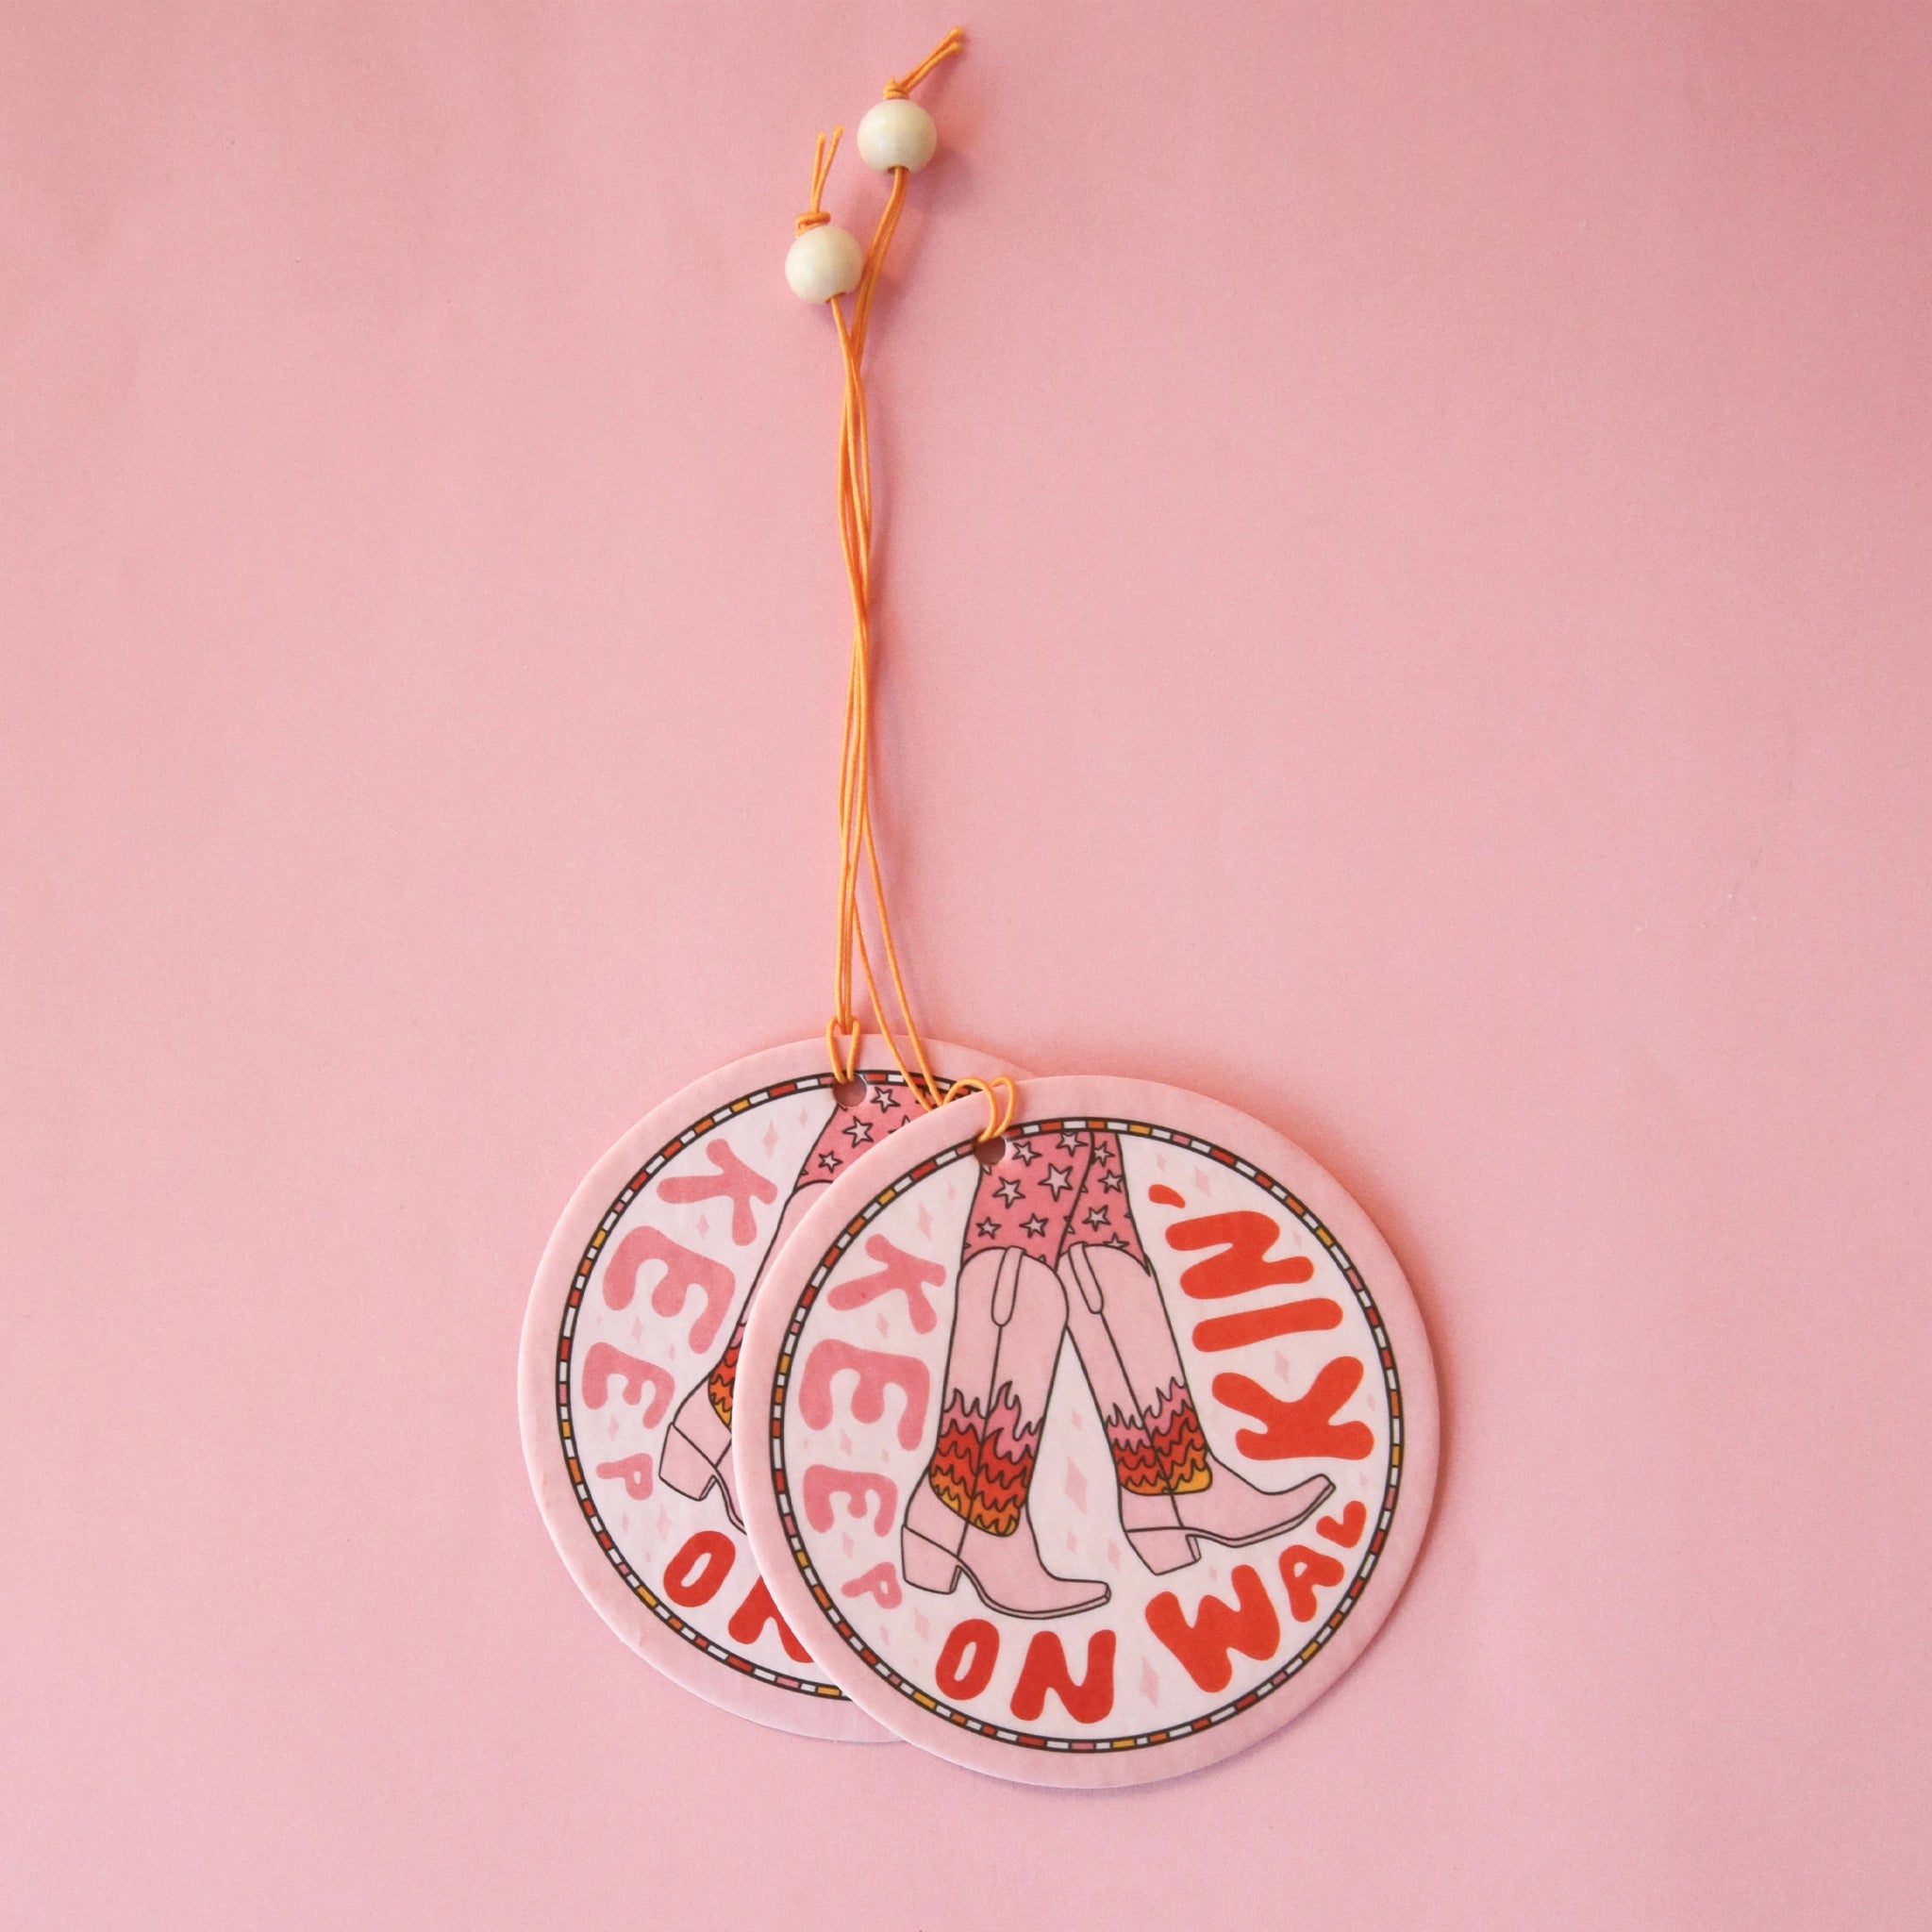 A light pink circle air freshener with a elastic loop for hanging and a cowgirl boot graphic with fire details on them and text that reads, "Keep On Walking'" in keep and red text around the edge of the air freshener.